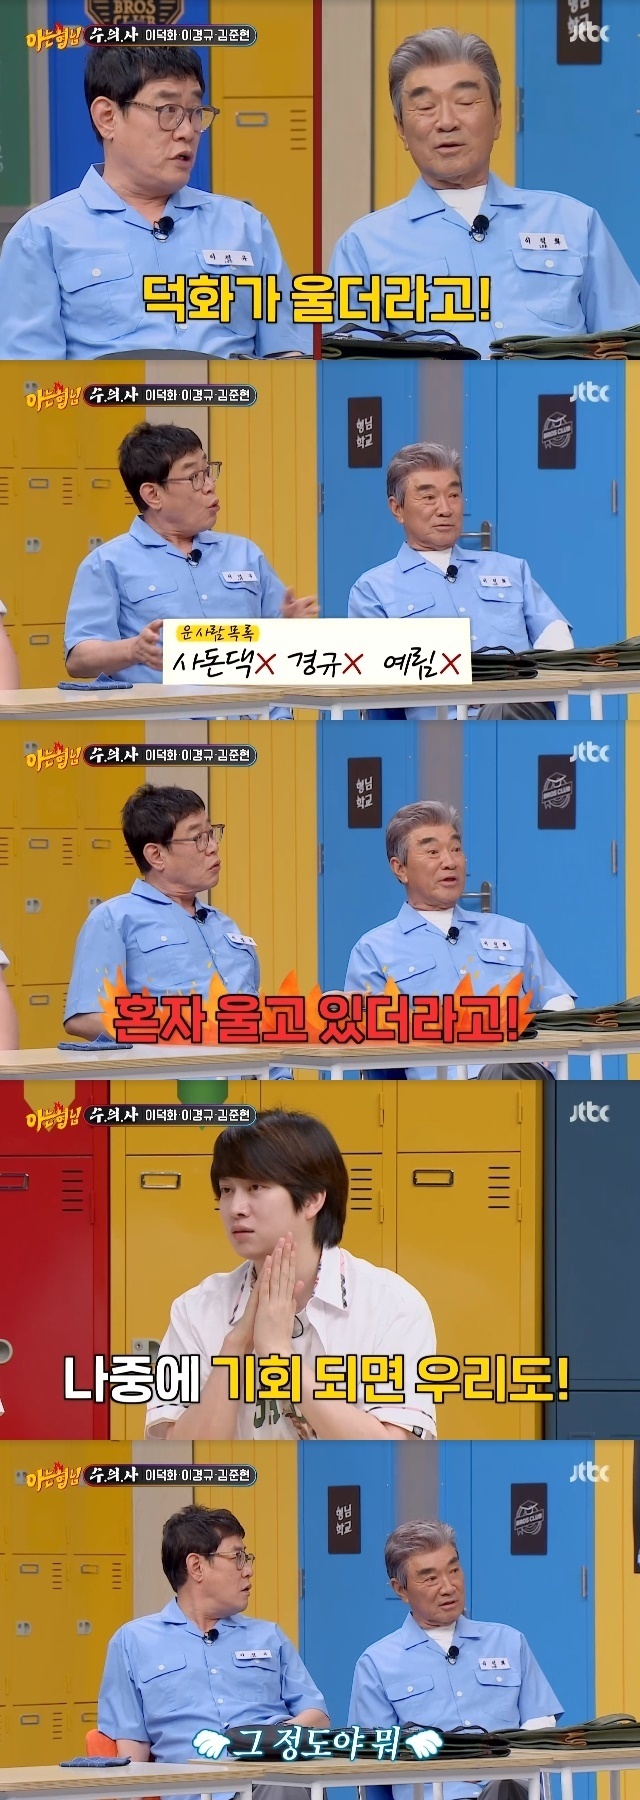 Lee gyeong-gyu revealed the experience of Lee Deok-hwas tears.In the 388th episode of JTBCs entertainment show Knowing Bros, which aired on June 17, famous anglers Lee gyeong-gyu, Lee Deok-hwa and Kim Joon-hyun appeared as guests.On this day, Kang Ho-dong mentioned Lee Deok-hwas righteousness, who took part in the wedding ceremony of Lee Yeong-gyus daughter Lee Yeolim.Lee Deok-hwa said, Of course I have to do it. I was worried that other seniors would say that gyeong-gyu is better than me. I was glad that I told them to do it.Lee gyeong-gyu revealed that Lee Deok-hwa was in tears at the time.Lee Deok-hwa said, Sometimes when I live as an actor, it is not my job, but I often feel like my job. Lee gyeong-gyu said, I did not cry, I did not cry, I did not cry and I was crying alone.Lee Deok-hwa later said, I have ruined my wedding because I can not shed tears.Lee Soo-geun said, We have two teams, and Lee Sang-hoon and Lee Sang-mins divorce attracted attention. .Lee Deok-hwa has never remarried, but promised to see Seo Jang-hoon and Lee Sang-mins wedding ceremony at the first opportunity.